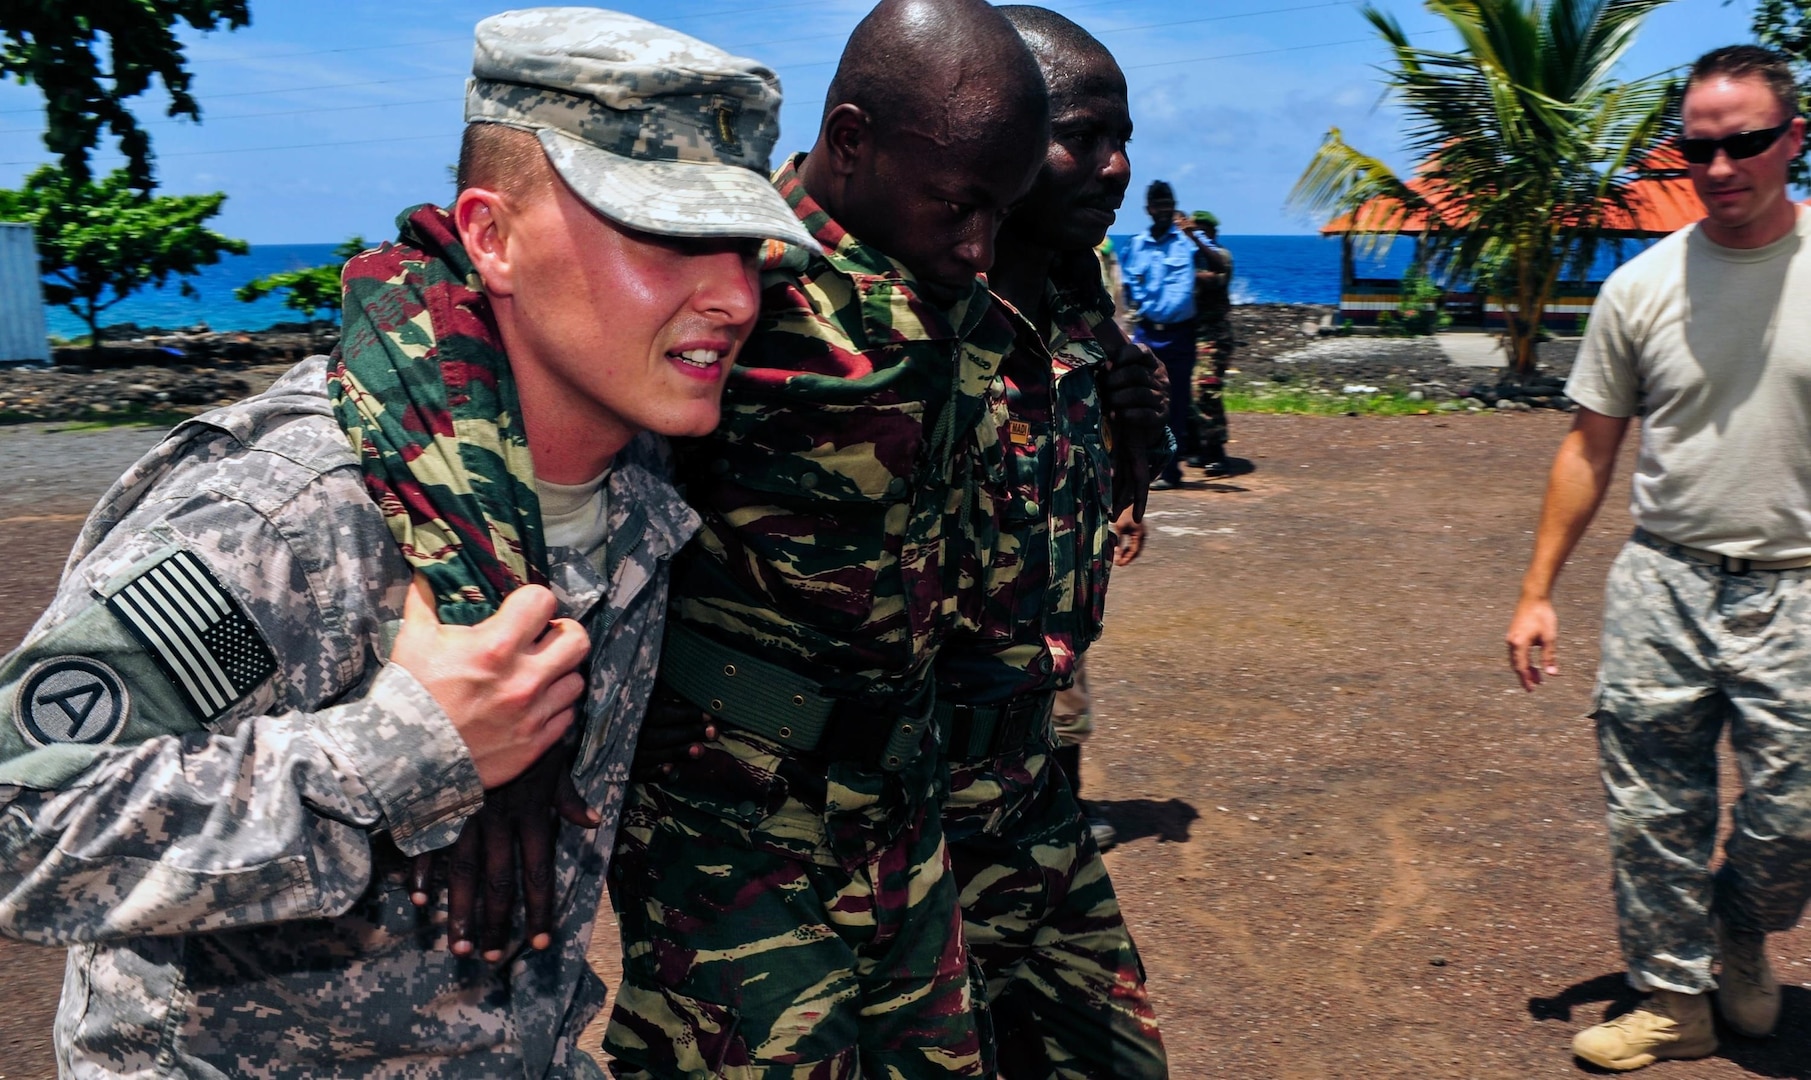 U.S. Army 2nd Lt. Justin Gilliam, Medical Section, 2nd Battalion, 138th Field Artillery, teaches members of the Comoros military various buddy carries in Moroni, Comoros, Jan. 23, 2013.